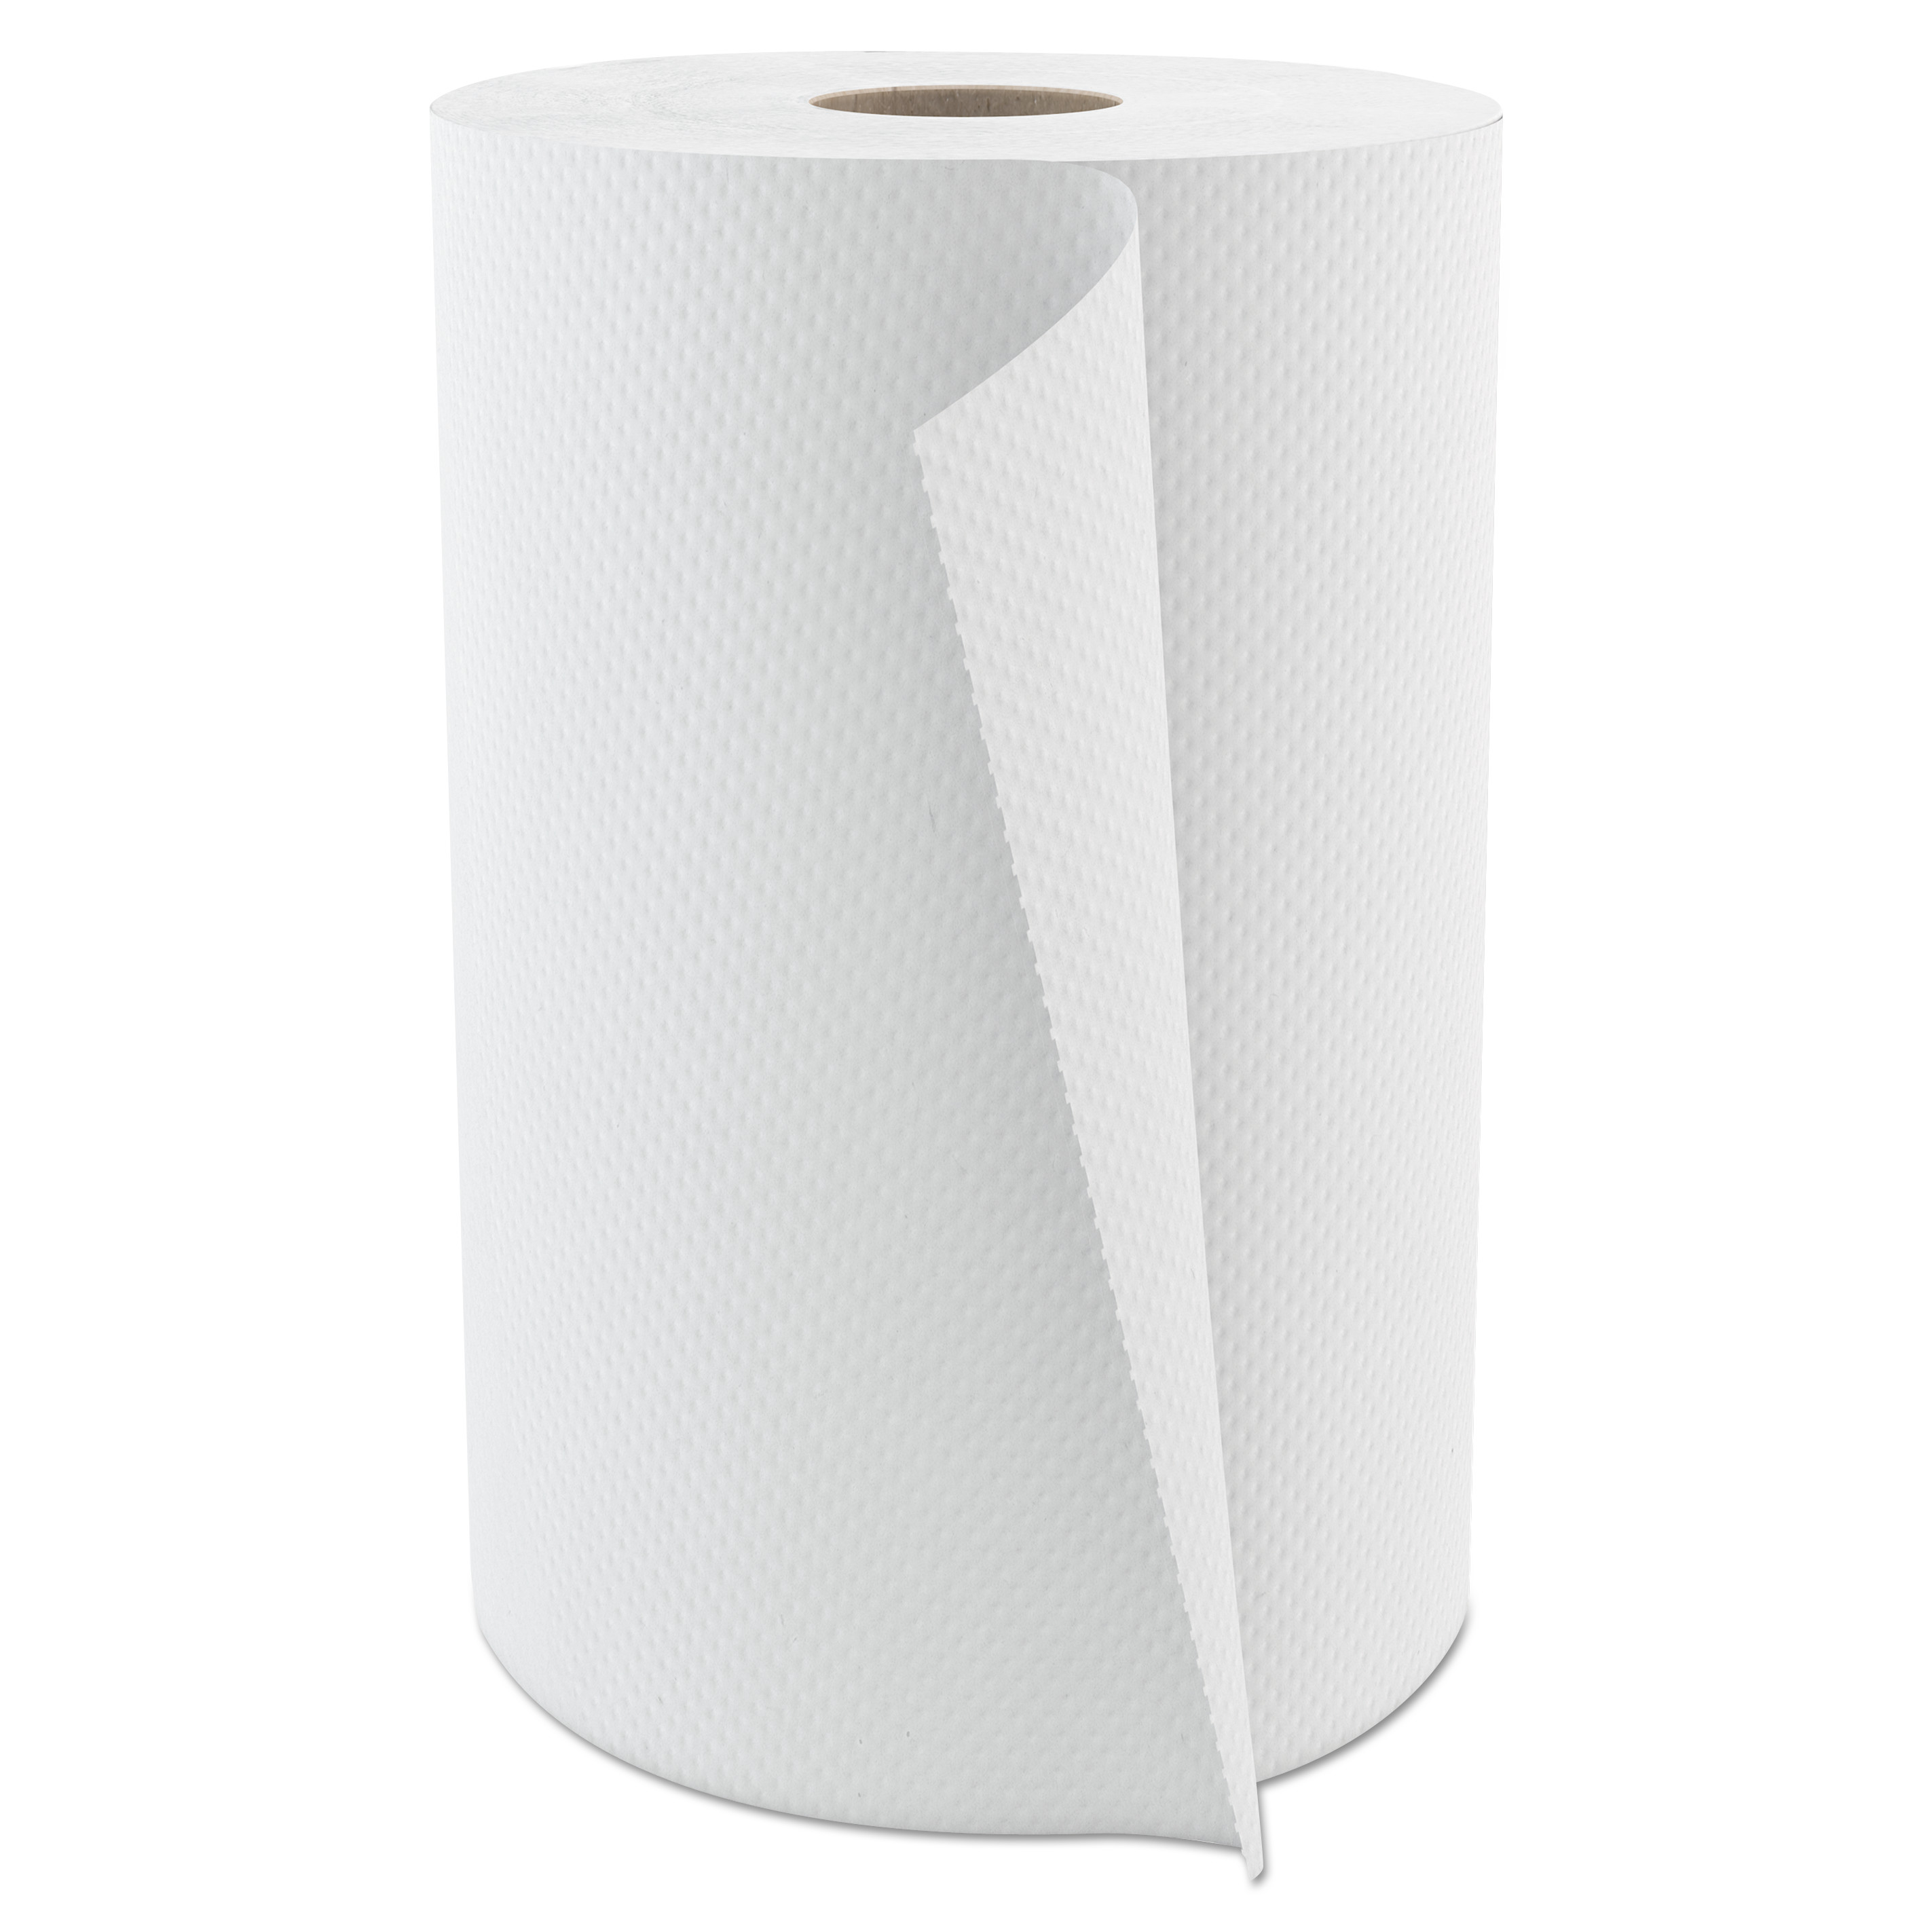  Cascades PRO H064 Select Roll Paper Towels, 1-Ply, 7.875 x 600 ft, White, 12/Carton (CSDH064) 